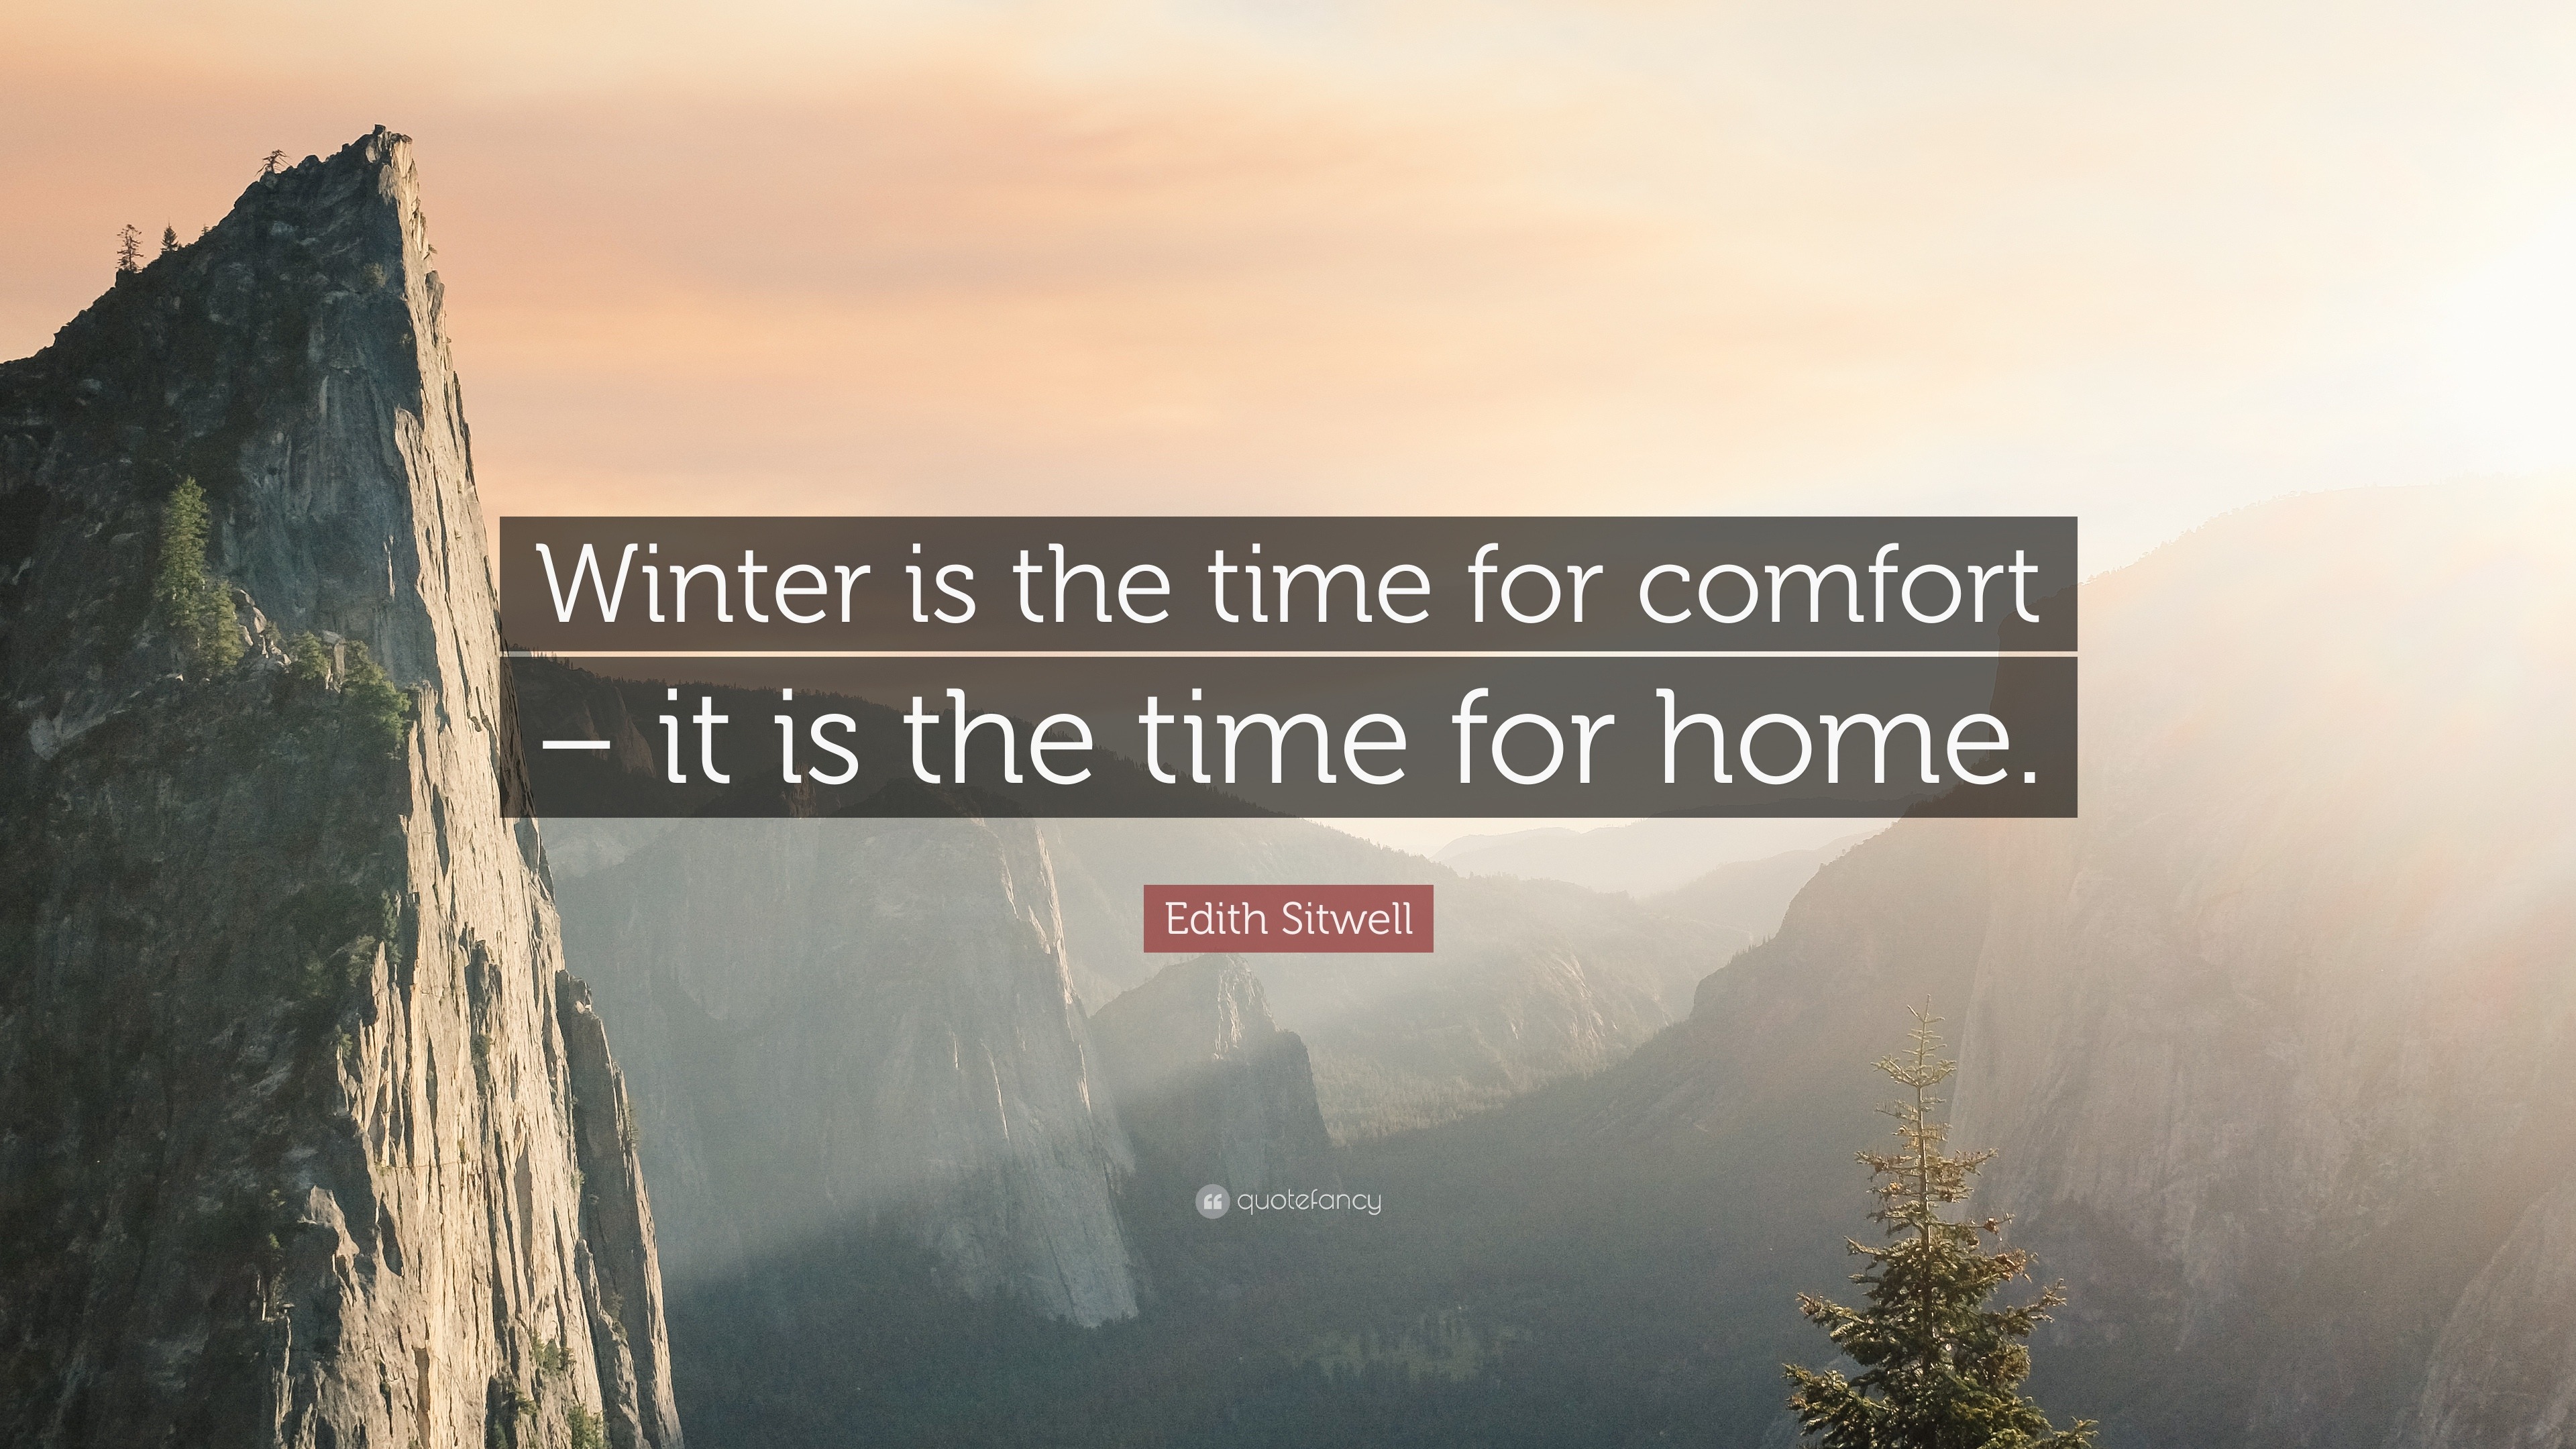 Edith Sitwell Quote: “Winter is the time for comfort – it is the time for  home.”